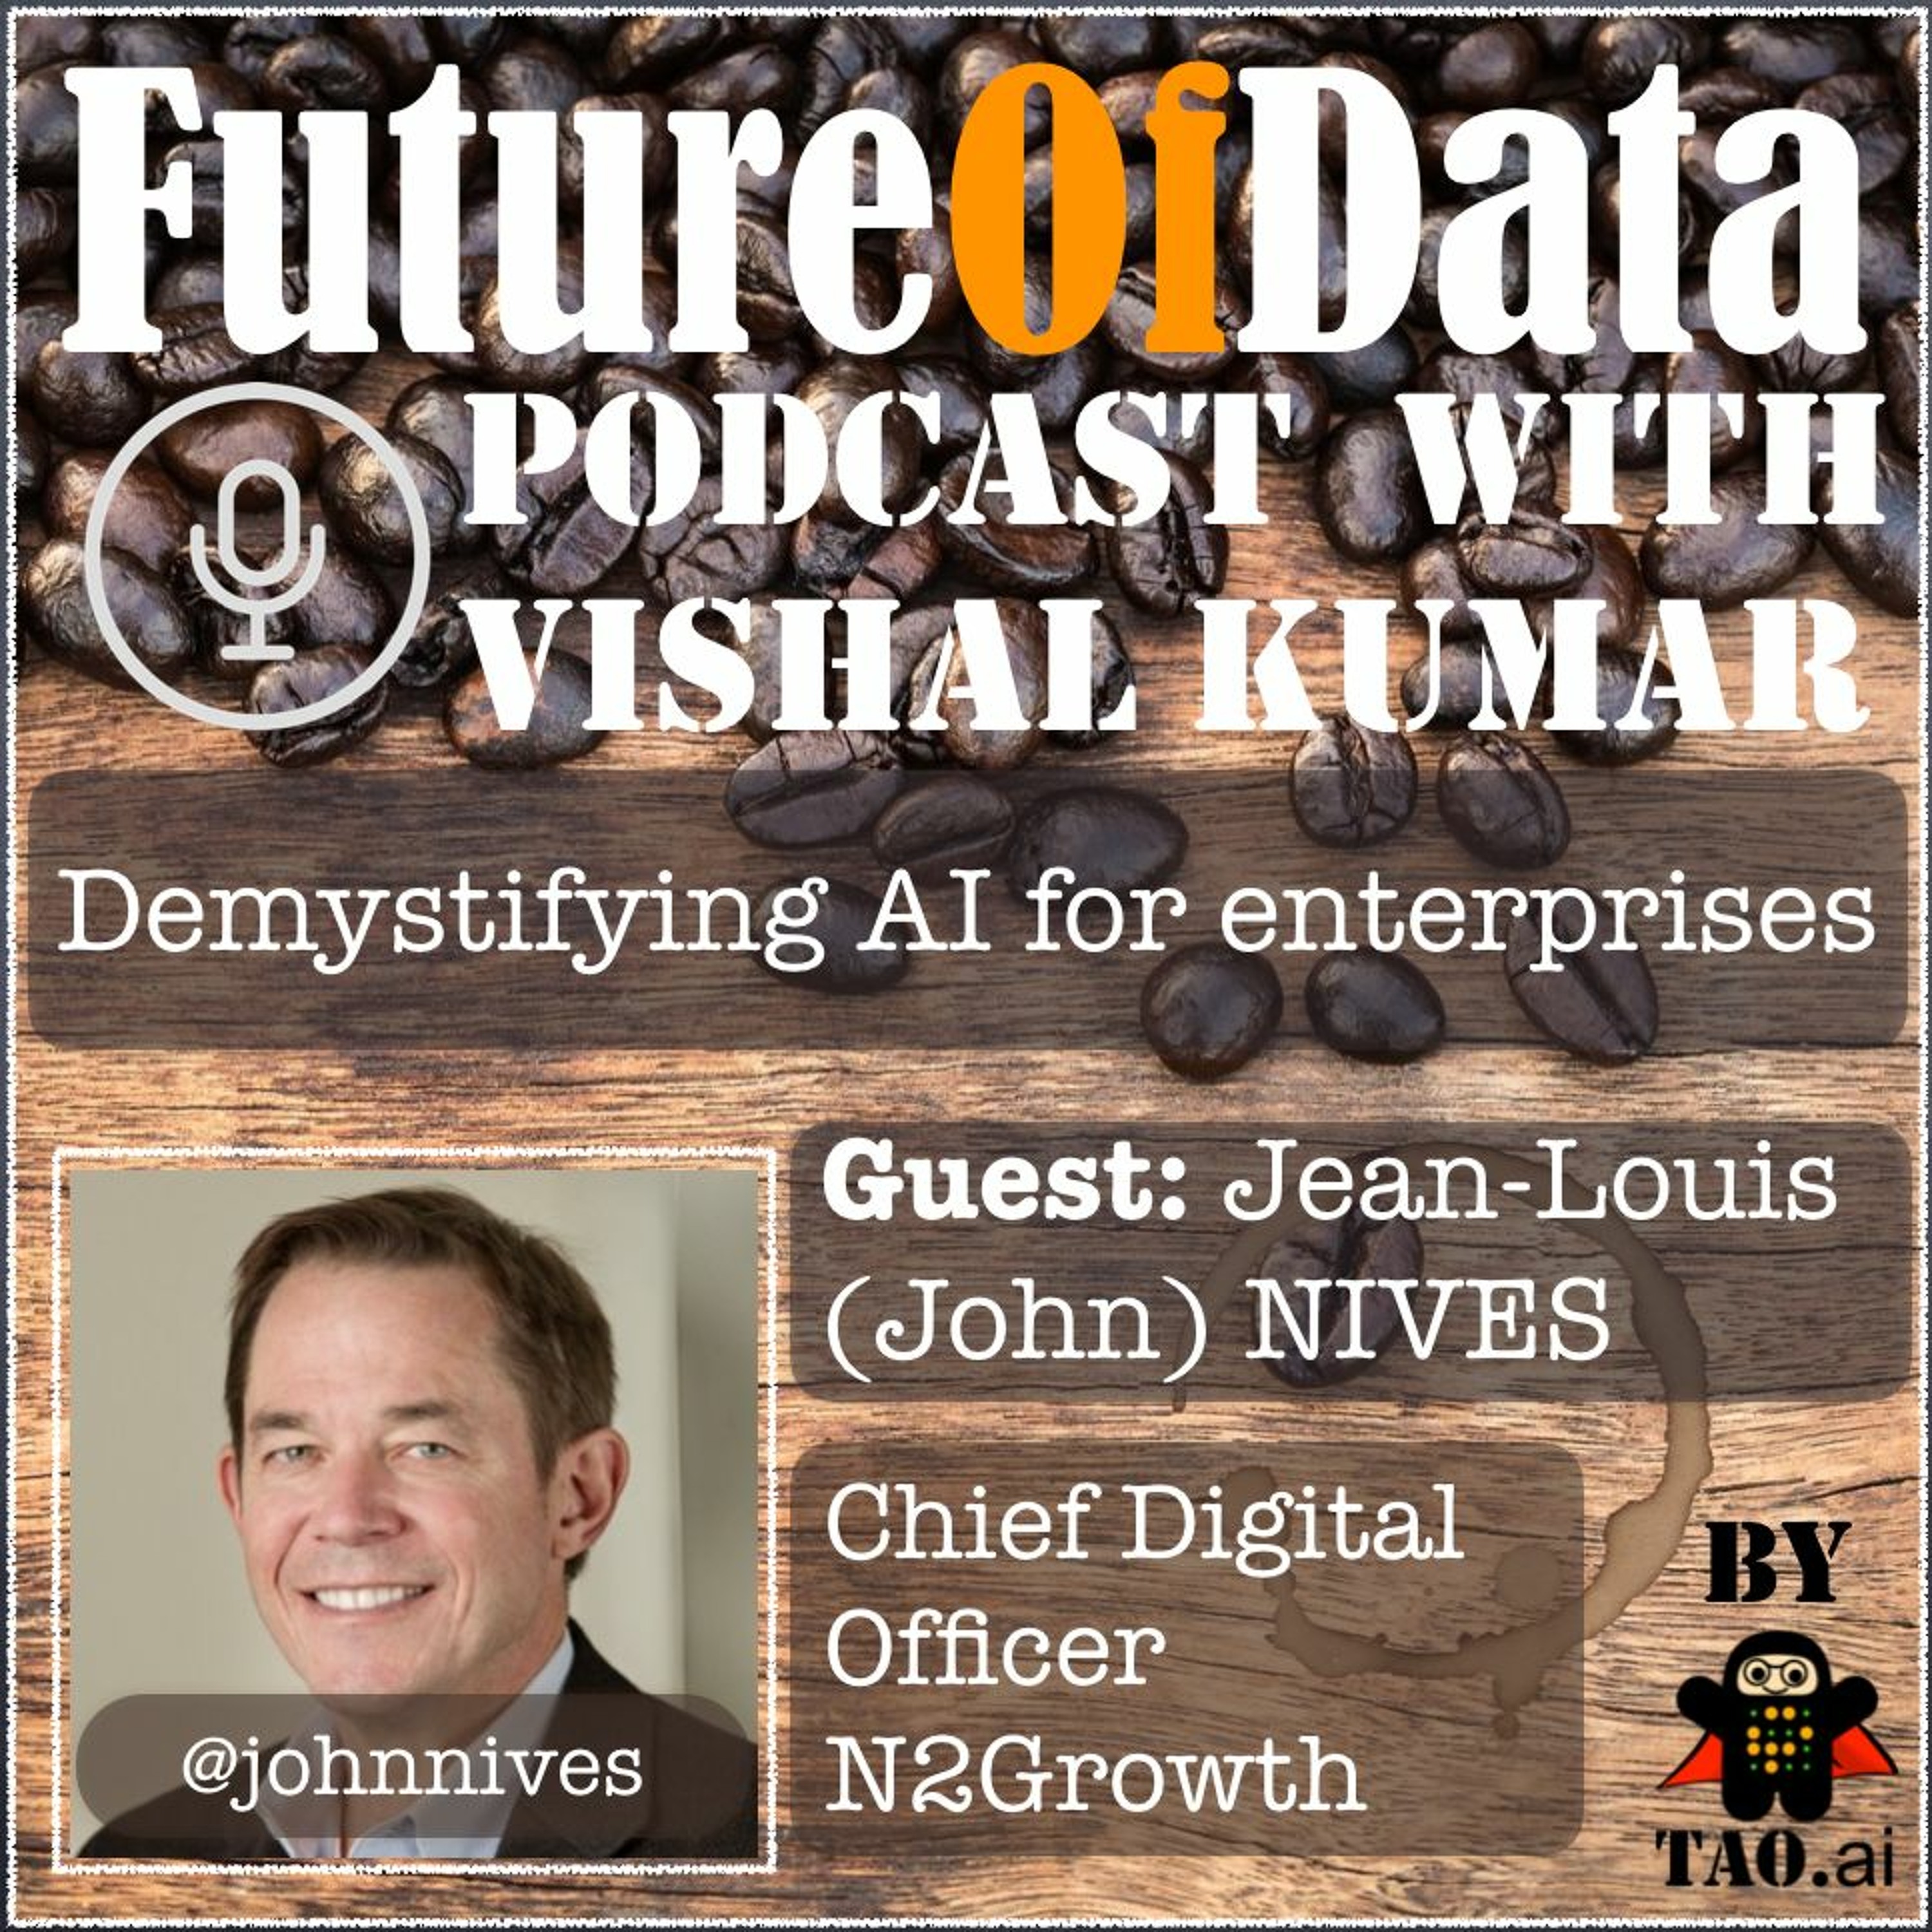 @JohnNives on ways to demystify AI for enterprise